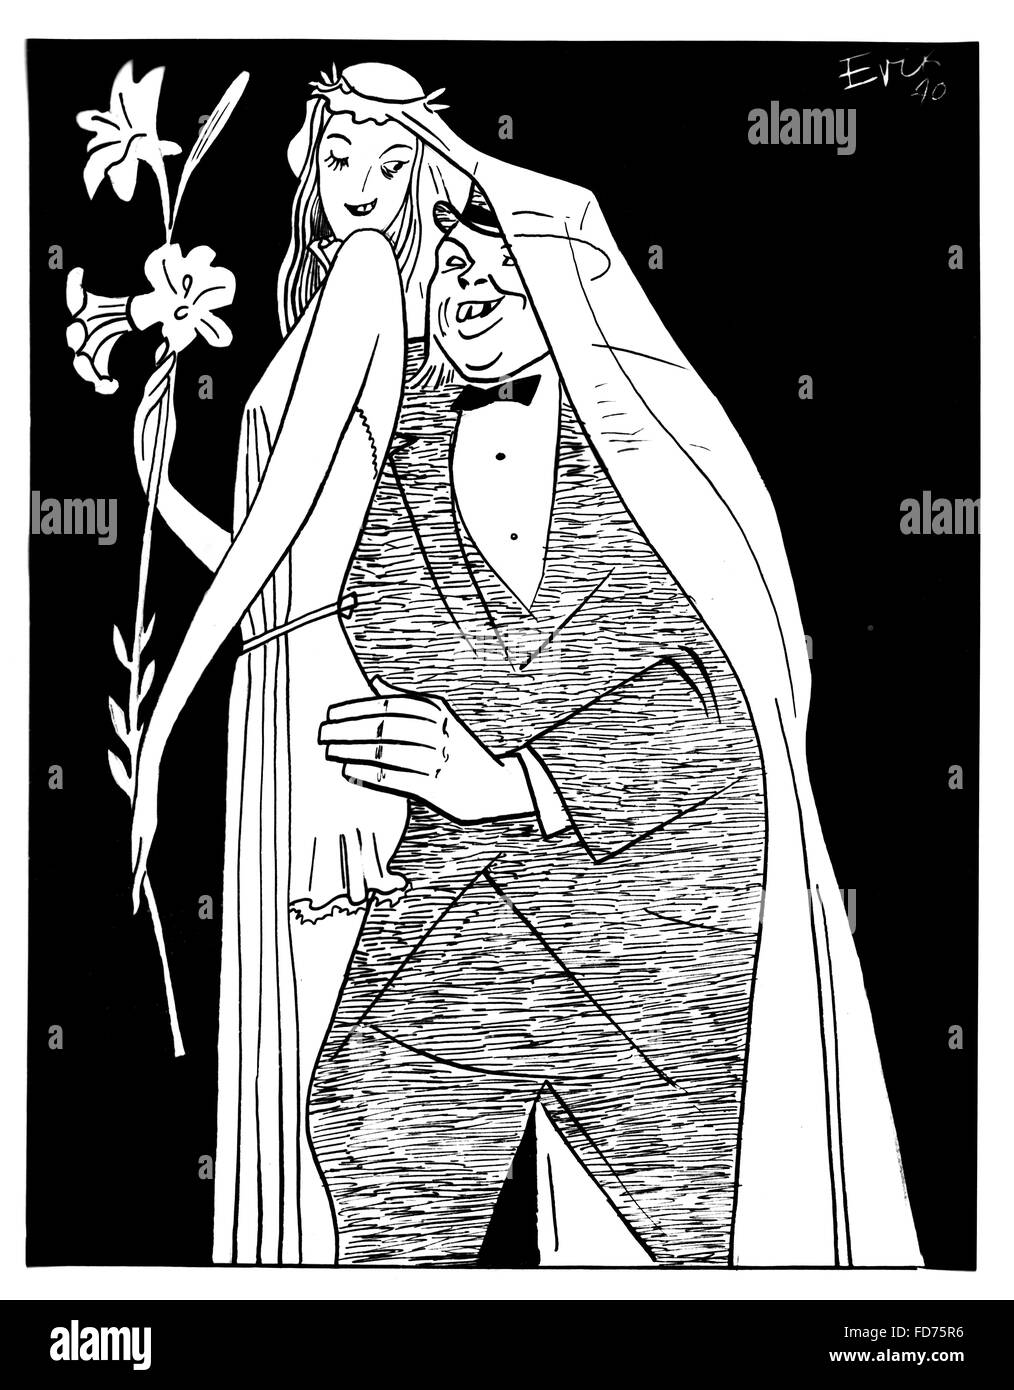 Caricature on Norway's 'neutrality', 1940 Stock Photo